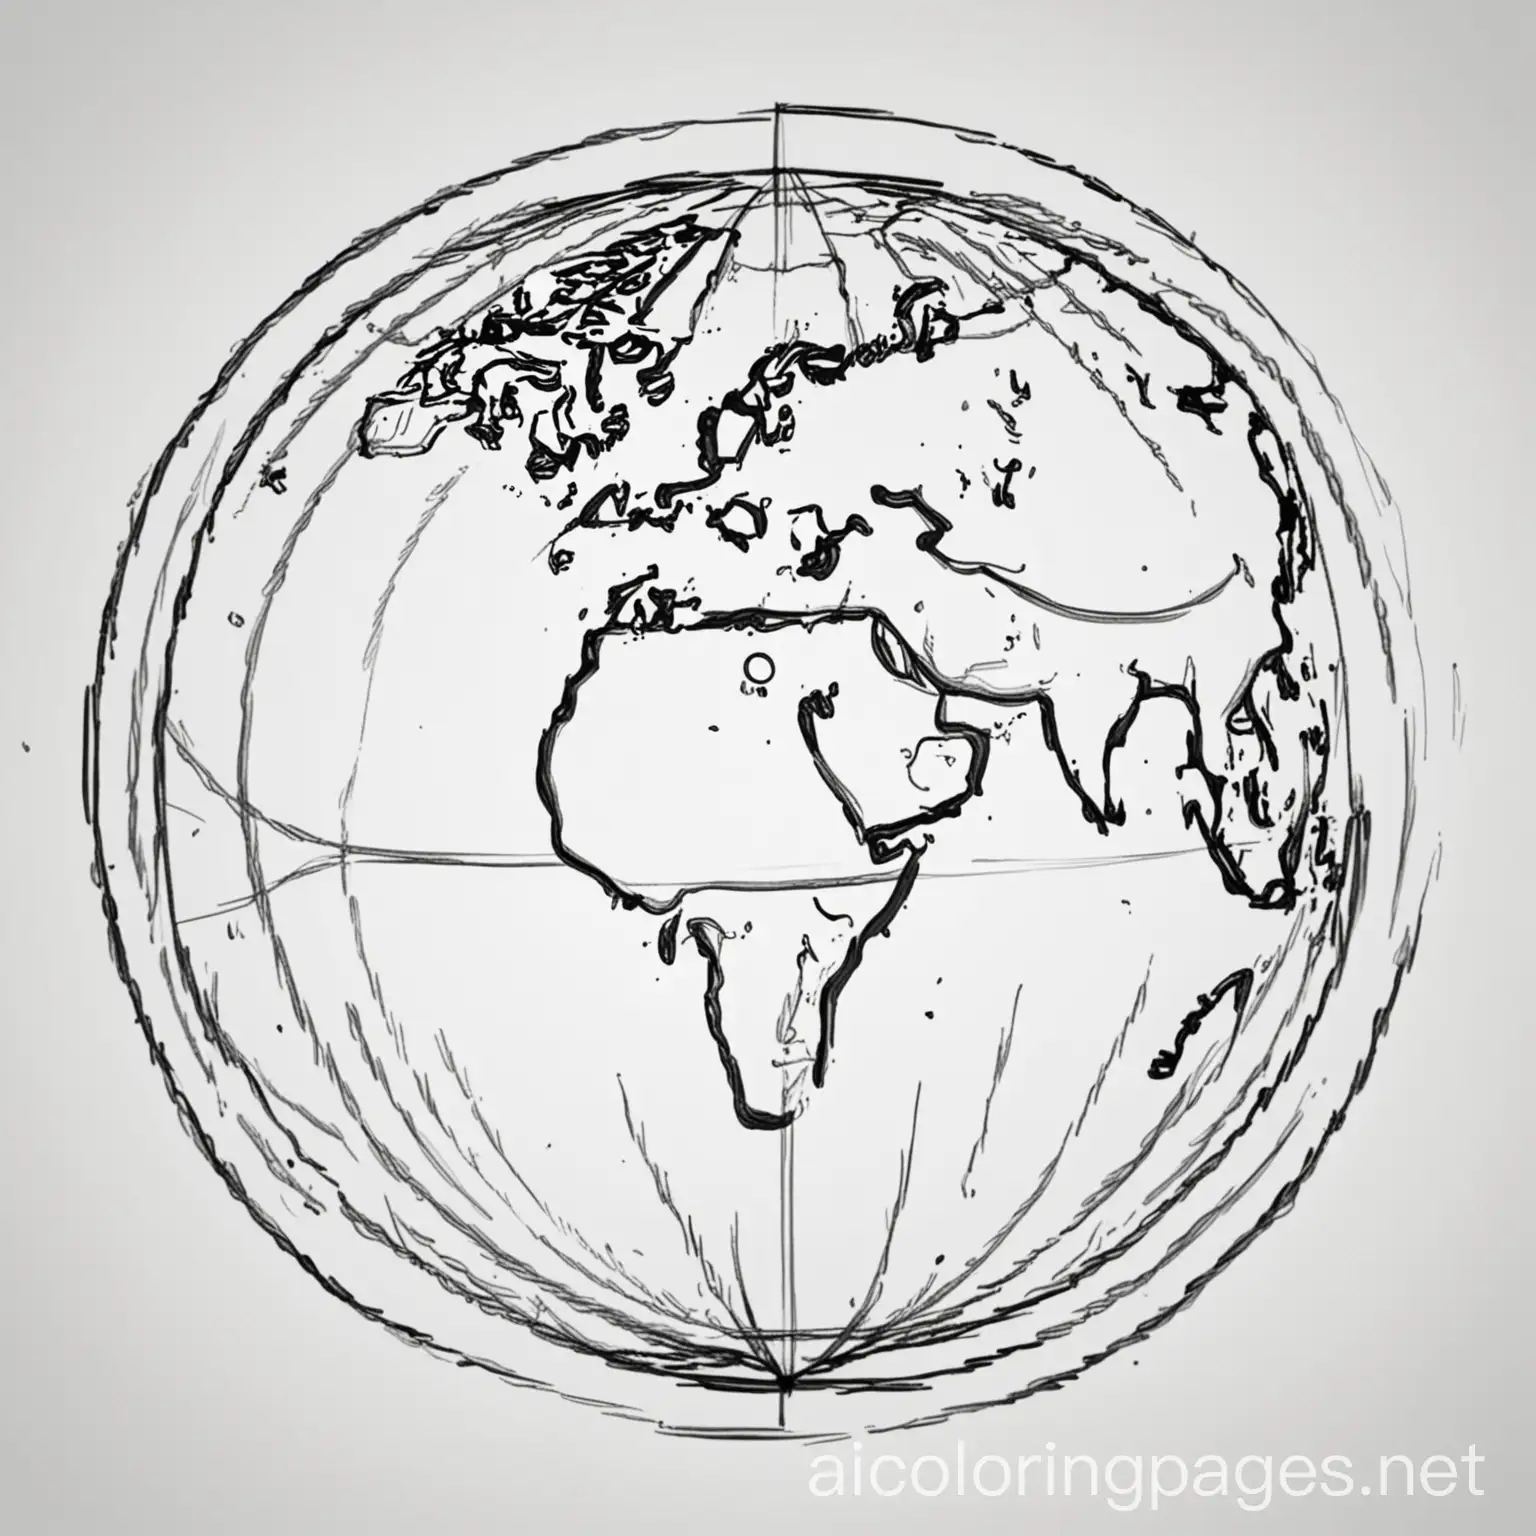 Simple-Globe-Coloring-Page-Easytocolor-Black-and-White-Line-Art